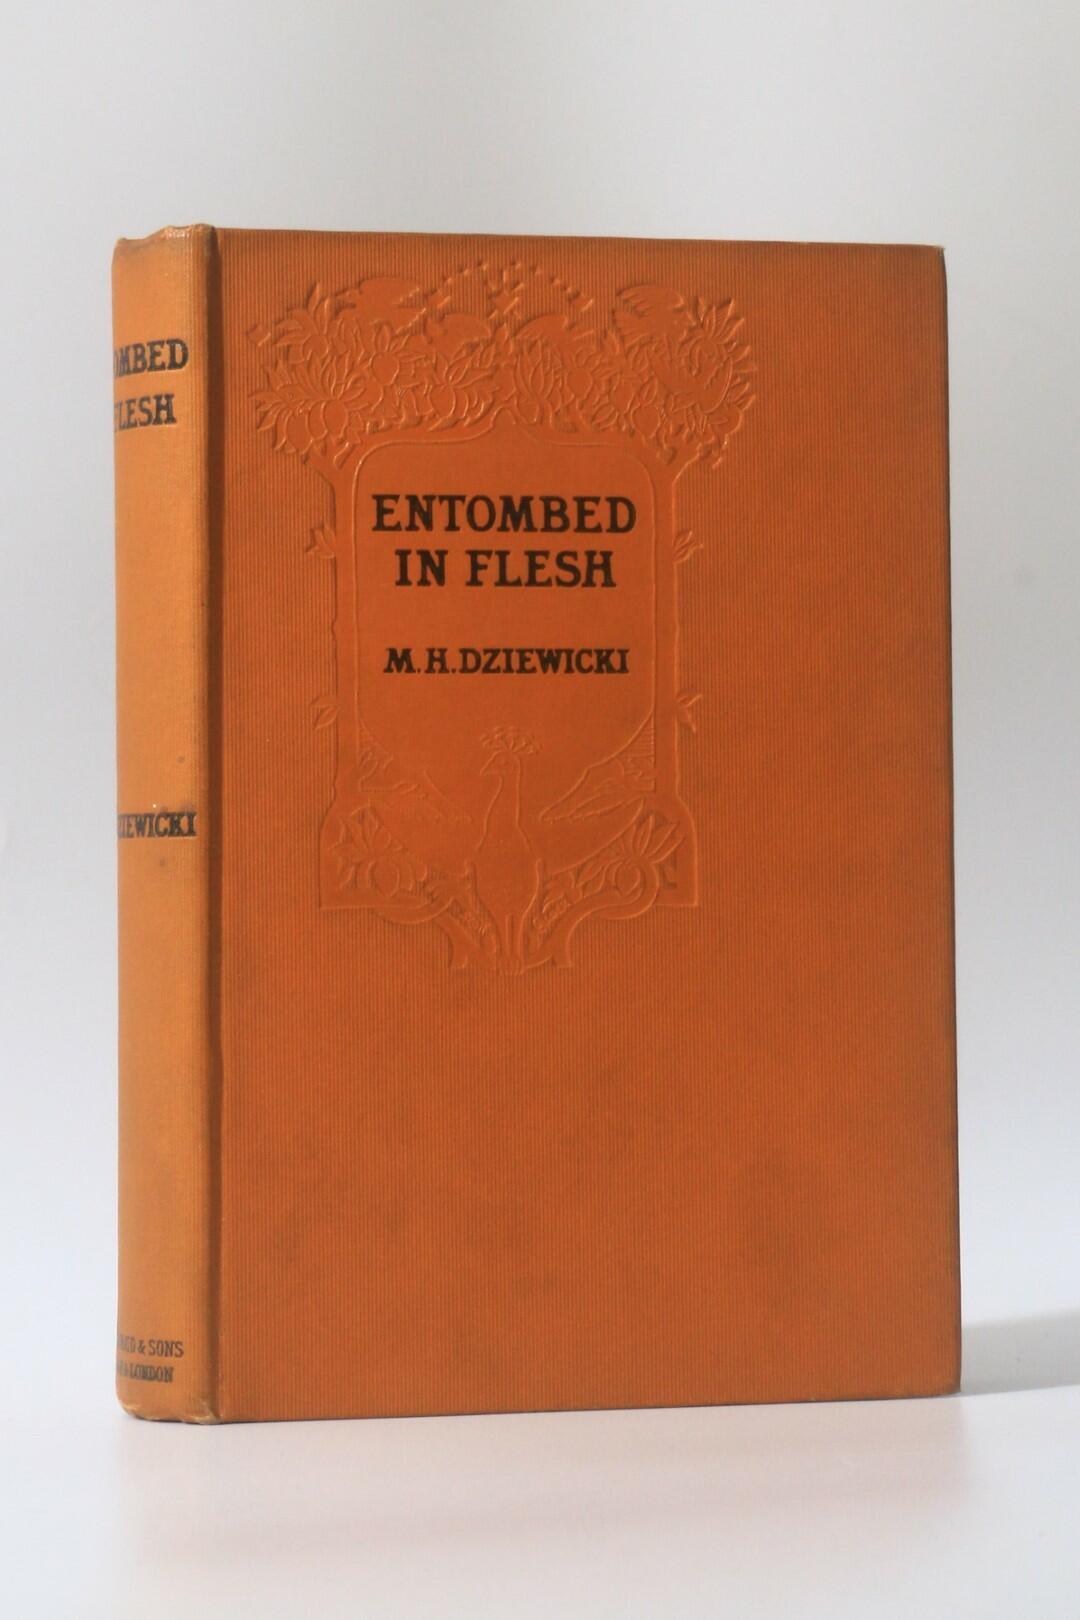 M.H. Dziewicki - Entombed in Flesh - William Blackwood & Sons, 1897, First Edition.